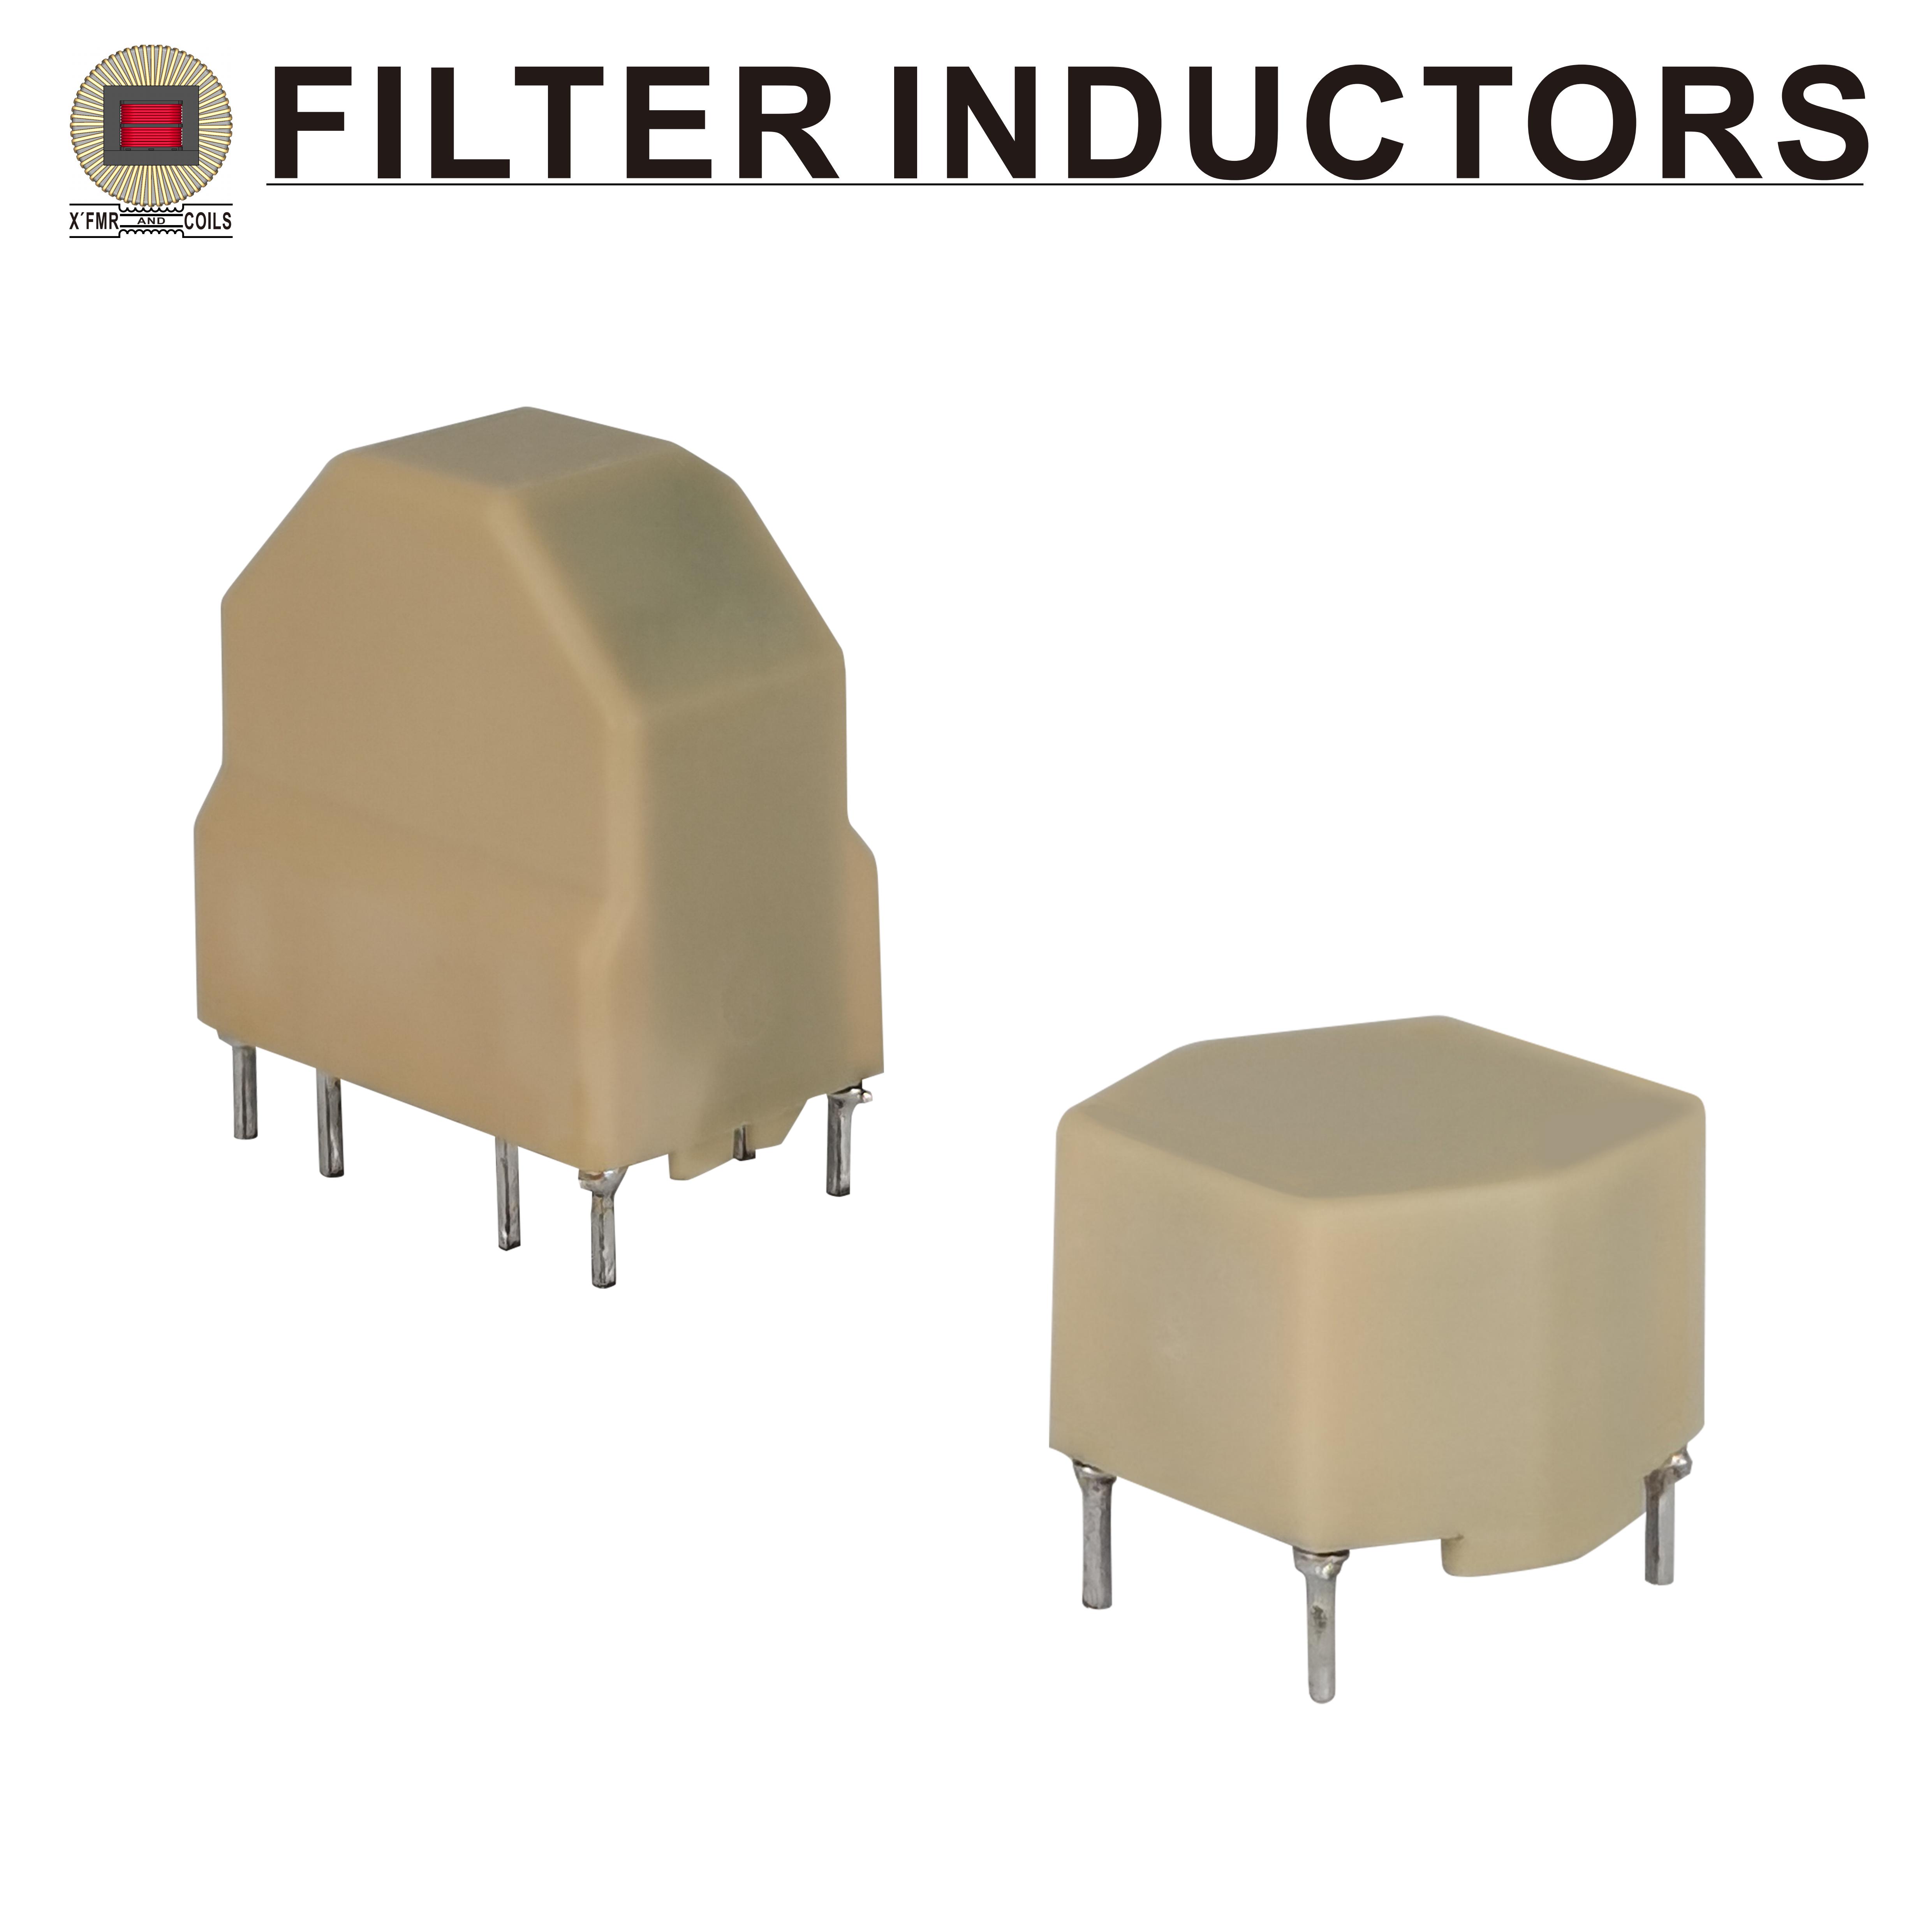 Filter Inductors FI-03 Series